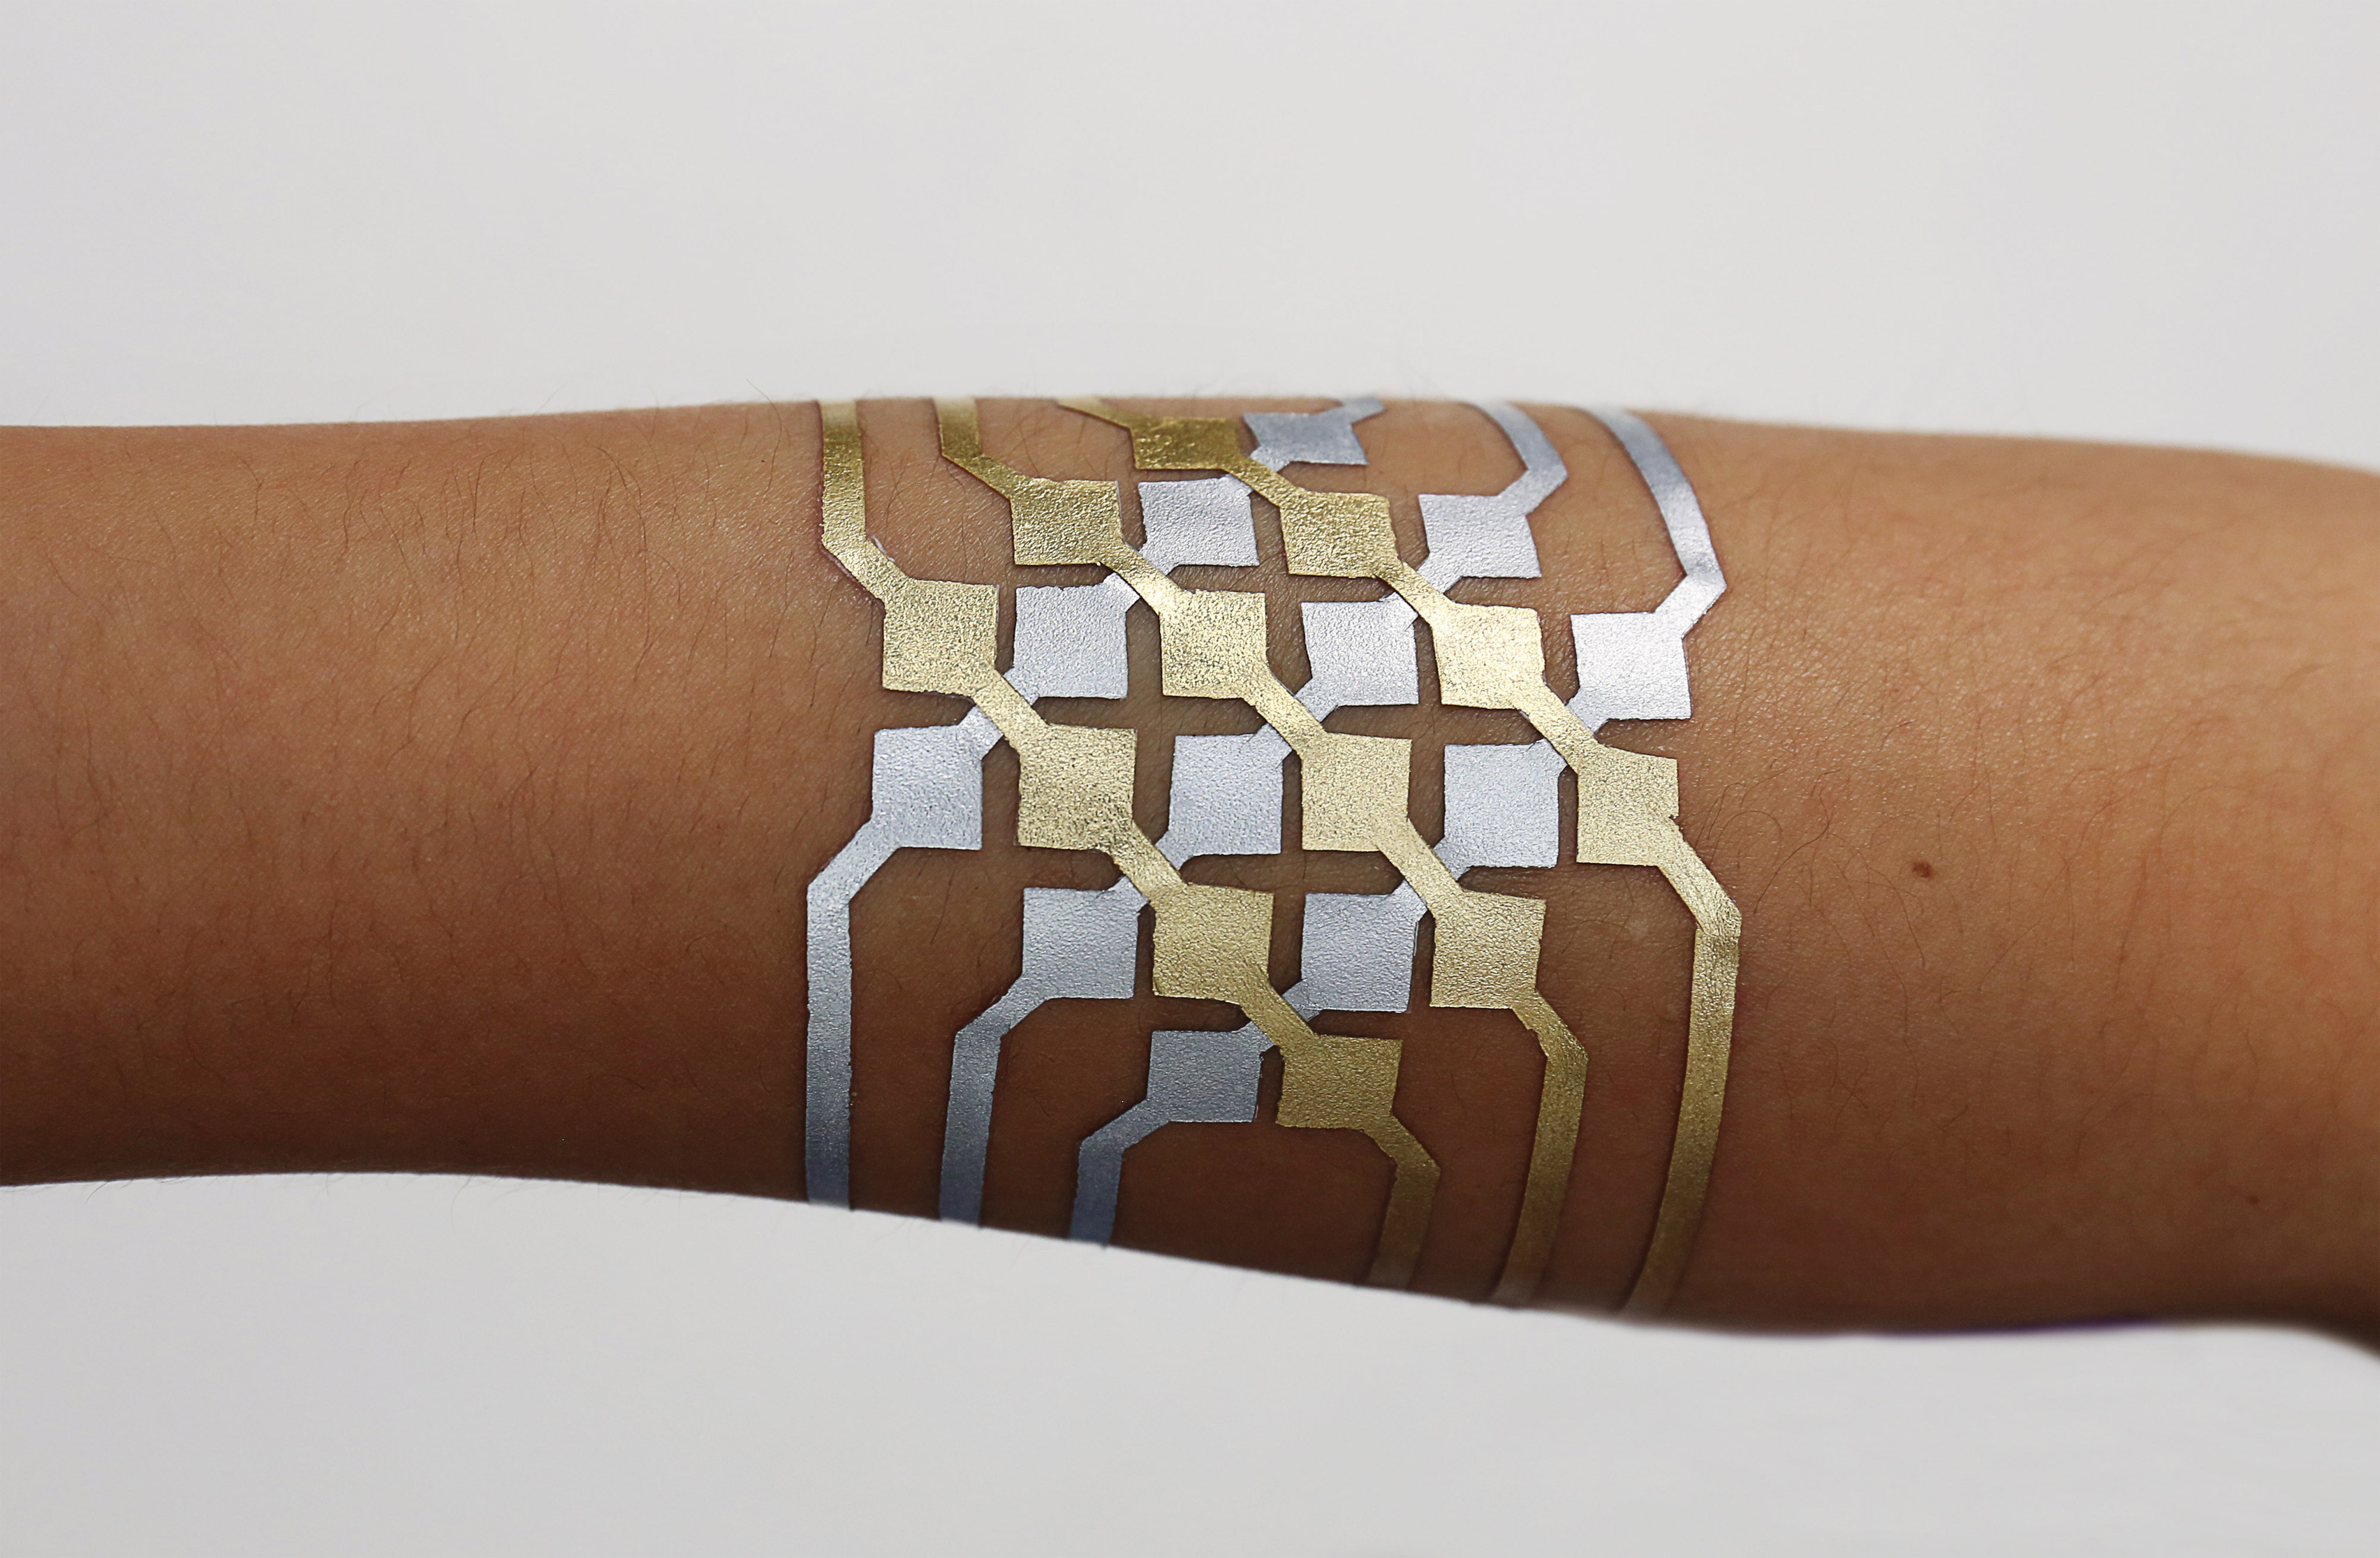 DuoSkin by MIT Labs